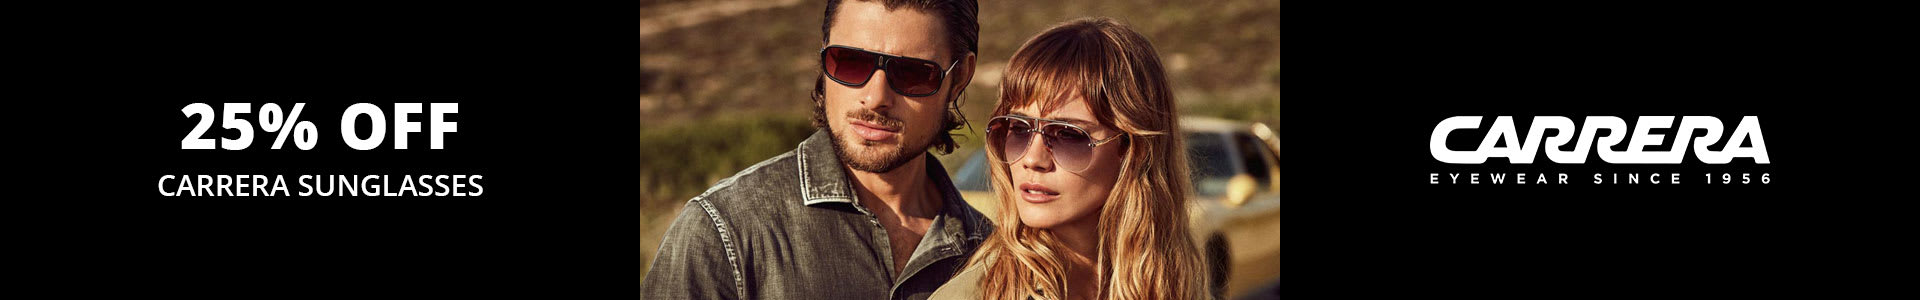 Early Holiday Shopping: Deals on Carrera Sunglasses and Prescription Sunglasses